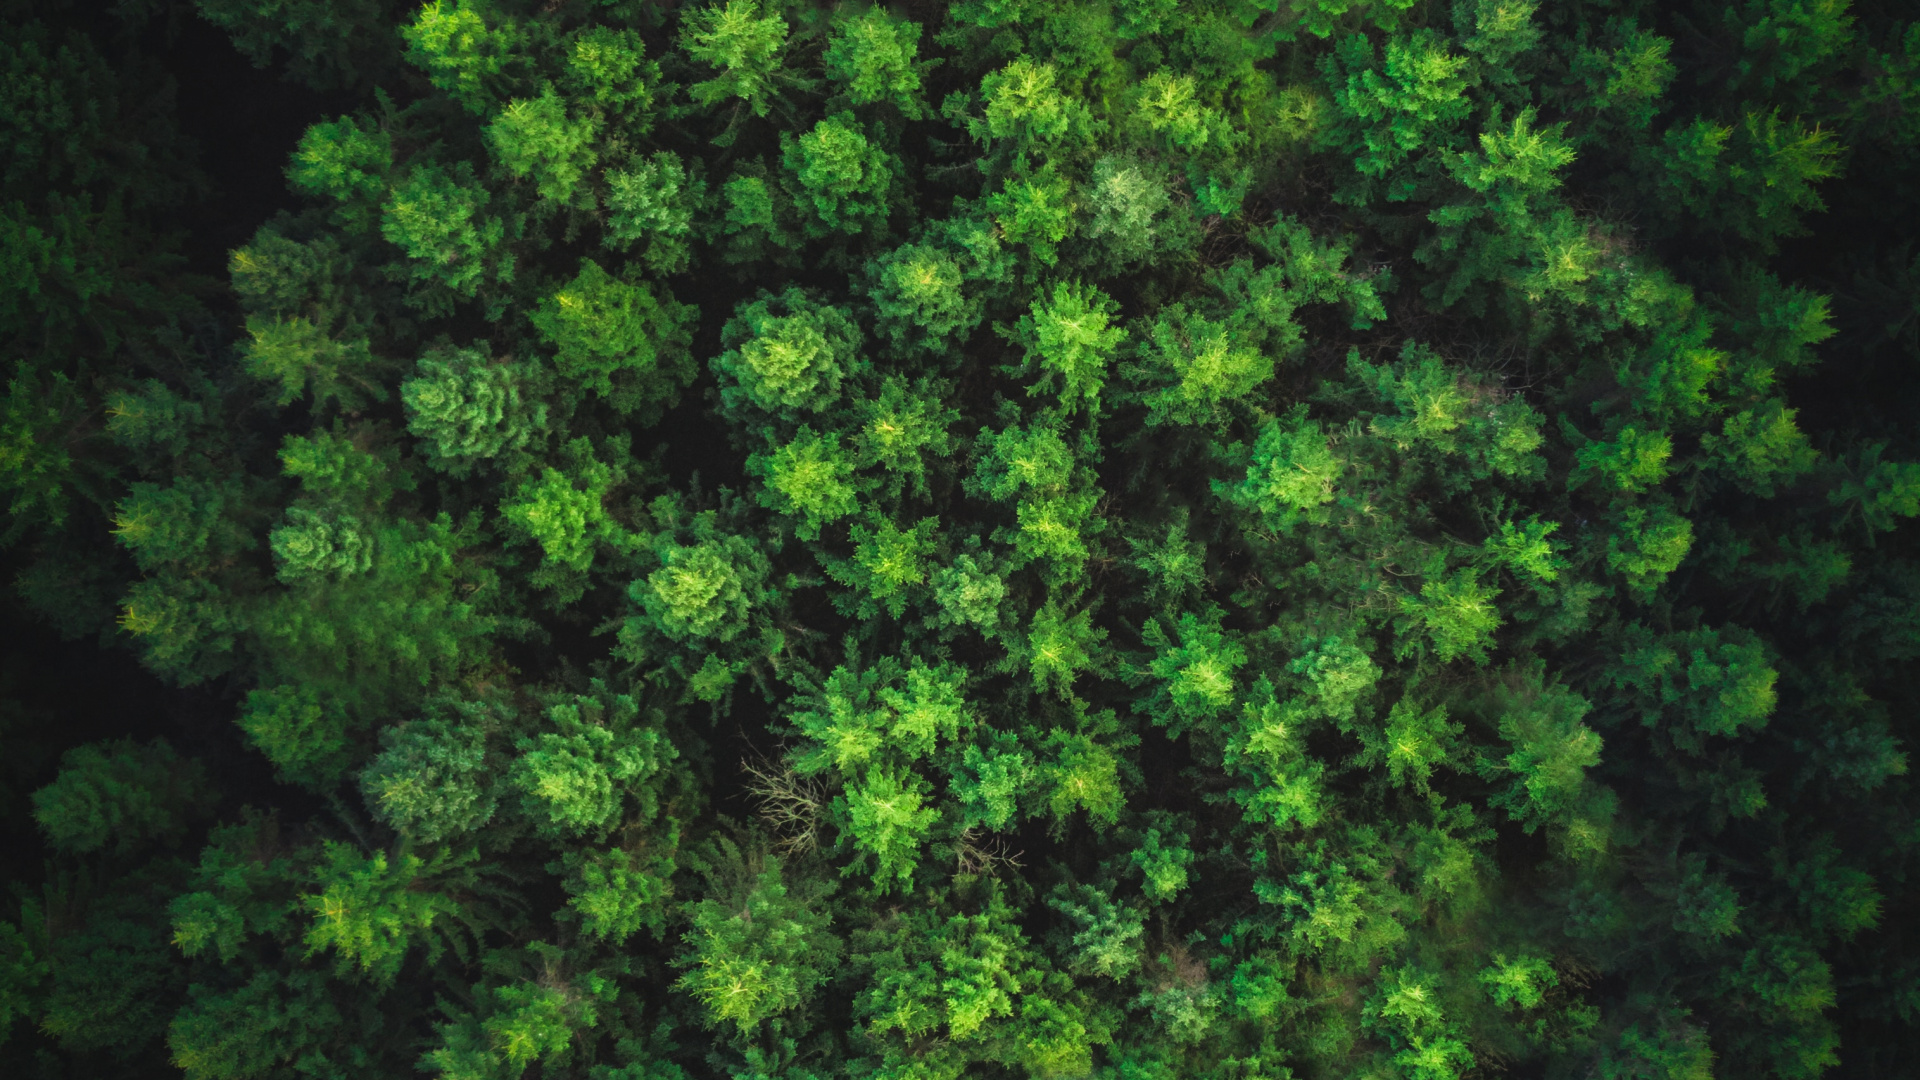 Green Leaves on Brown Soil. Wallpaper in 1920x1080 Resolution